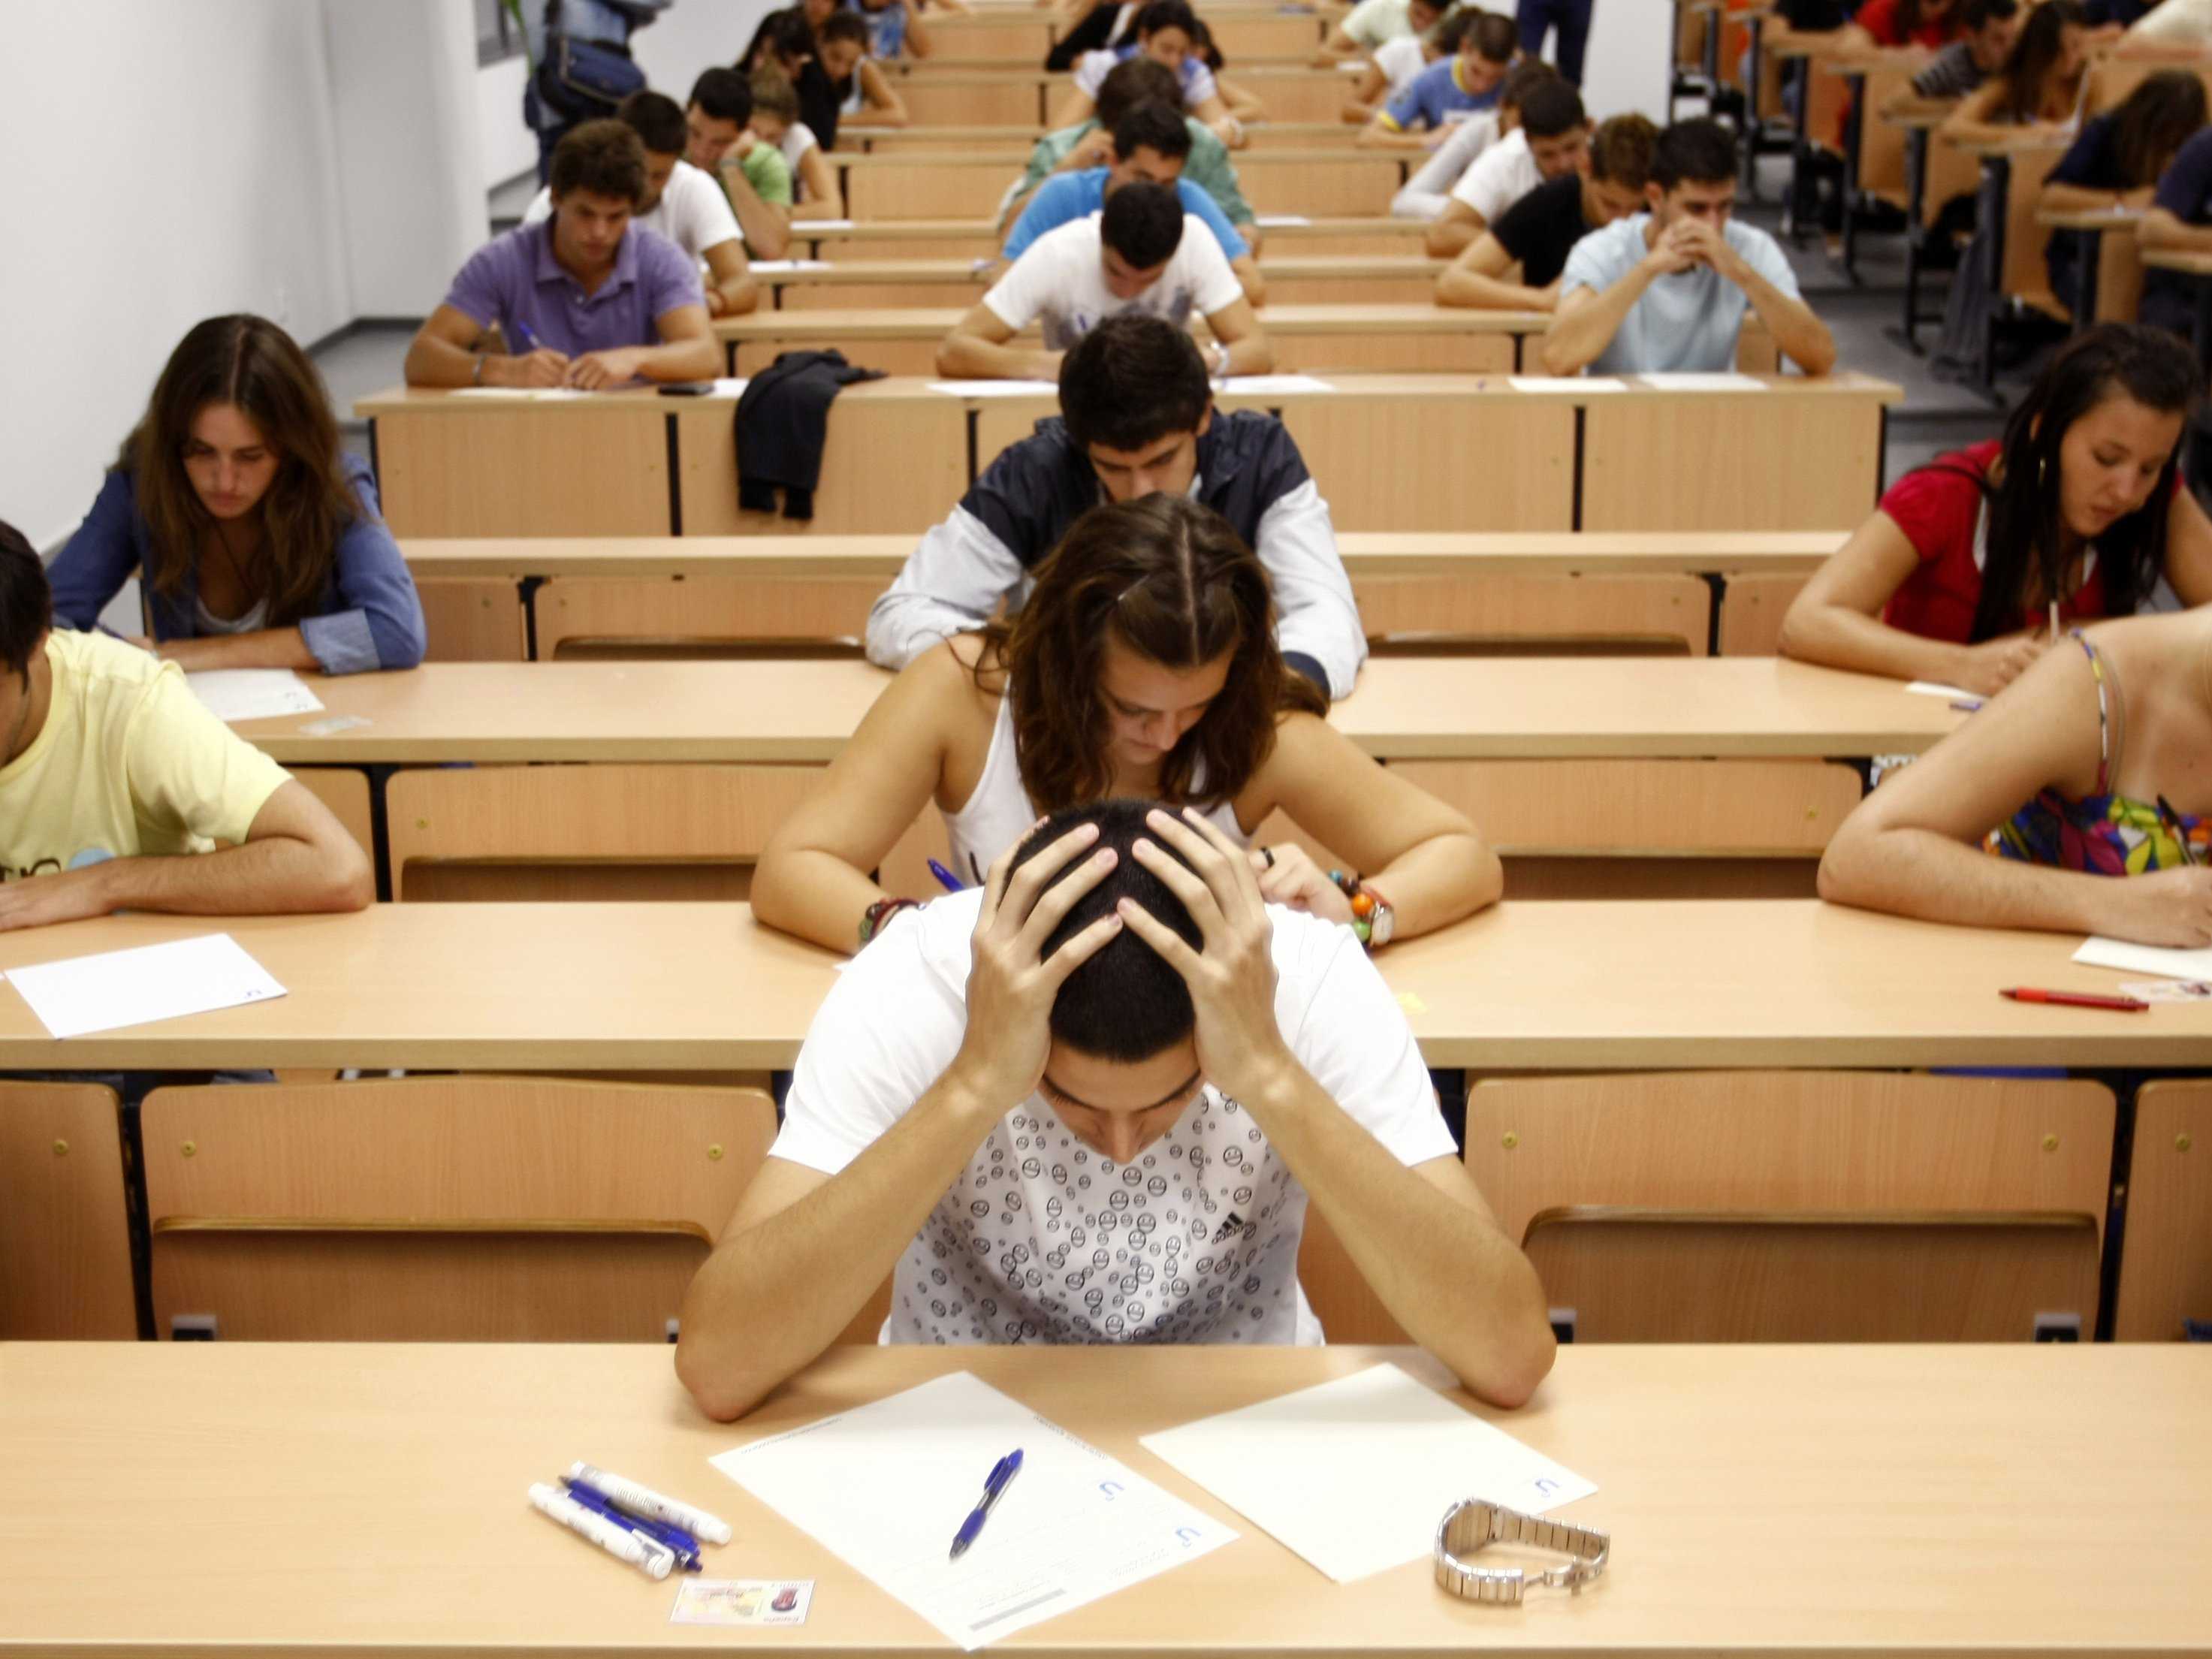 5 Realistic Tips to Get You Through Your End-of-Semester Slump